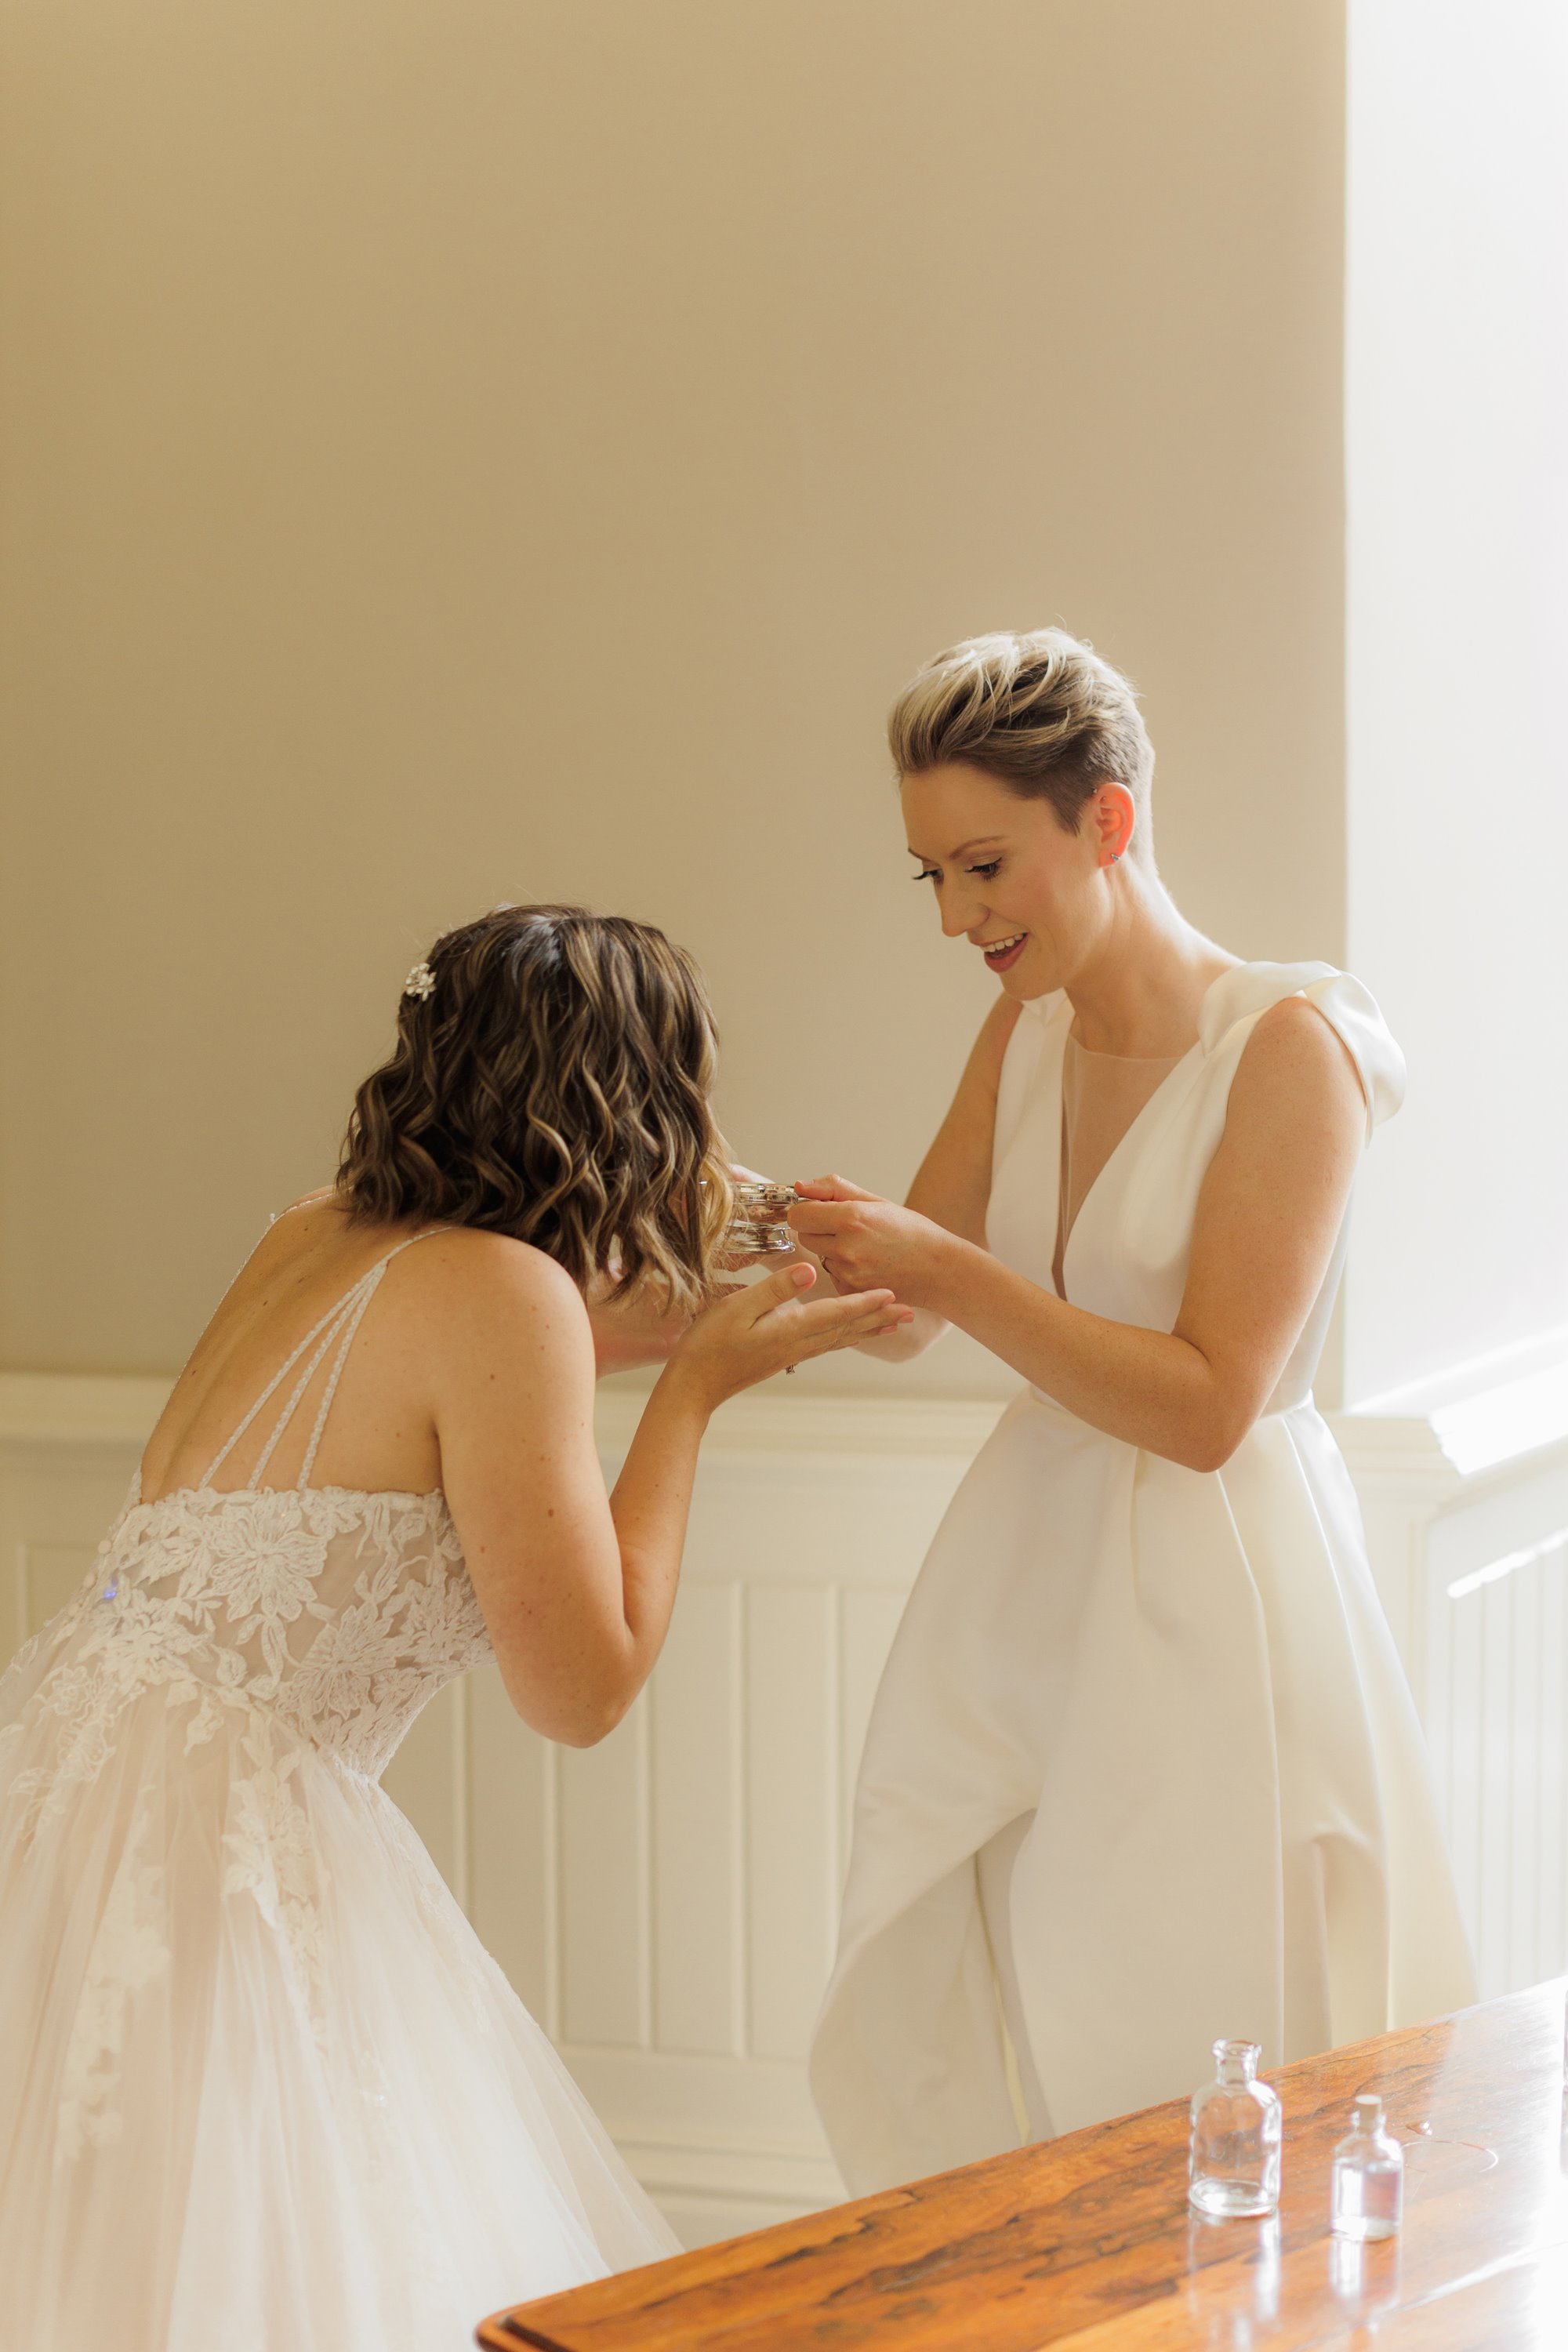 two beautiful brides dressed in white sharing a special moment